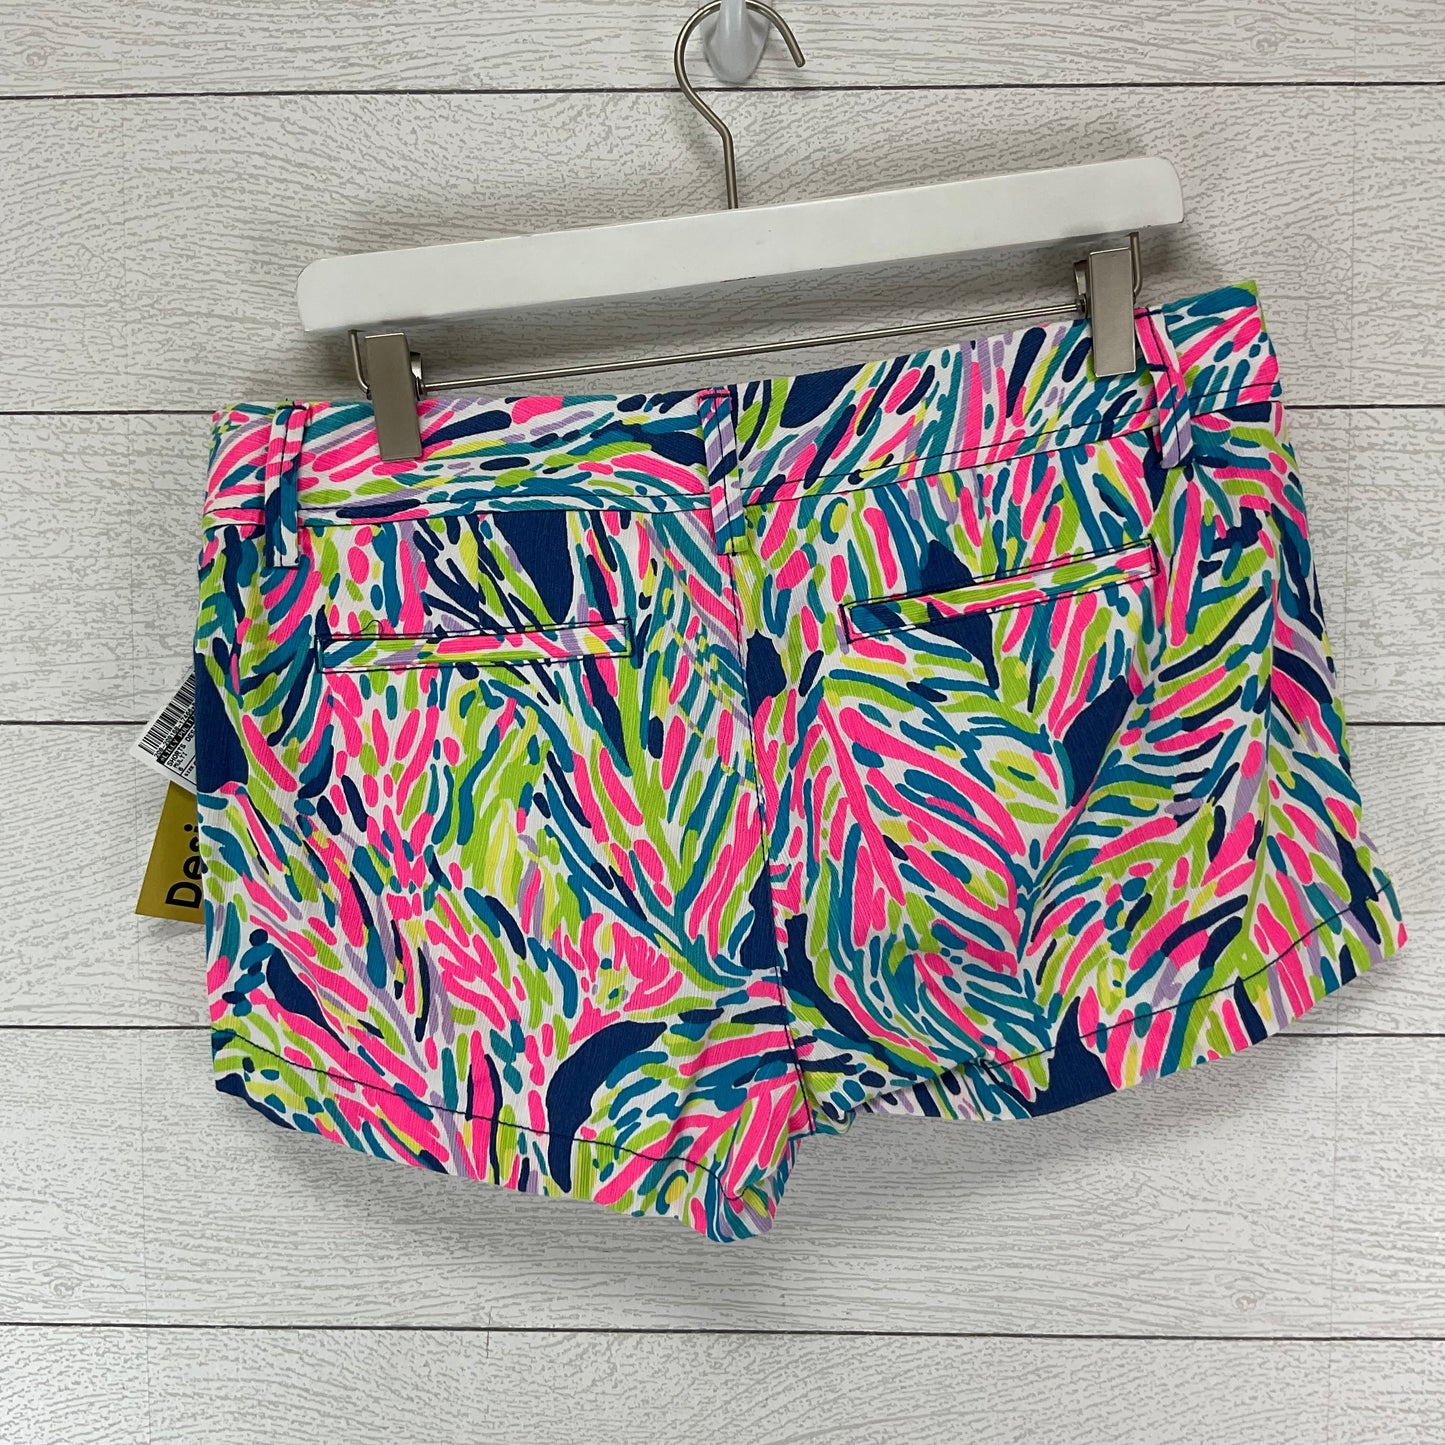 Multi-colored Shorts Designer Lilly Pulitzer, Size 6